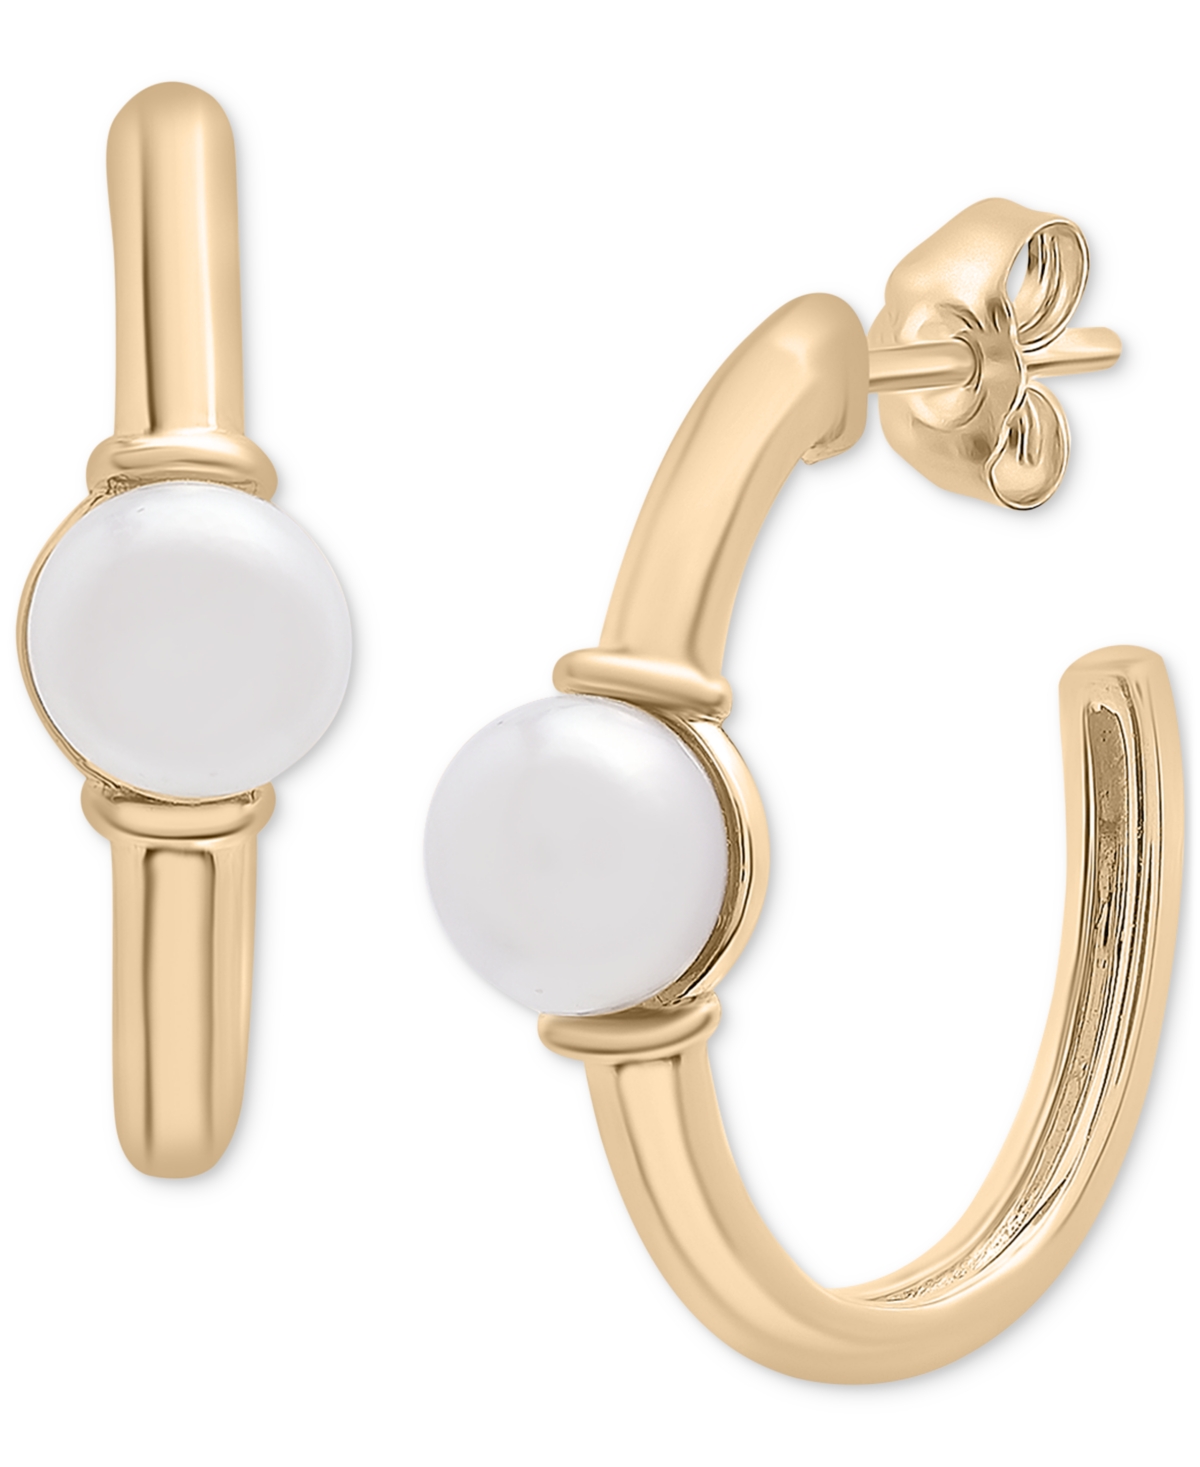 Cultured Freshwater Pearl (5mm) Small Hoop Earrings in Gold Vermeil, Created for Macy's - Gold Vermeil